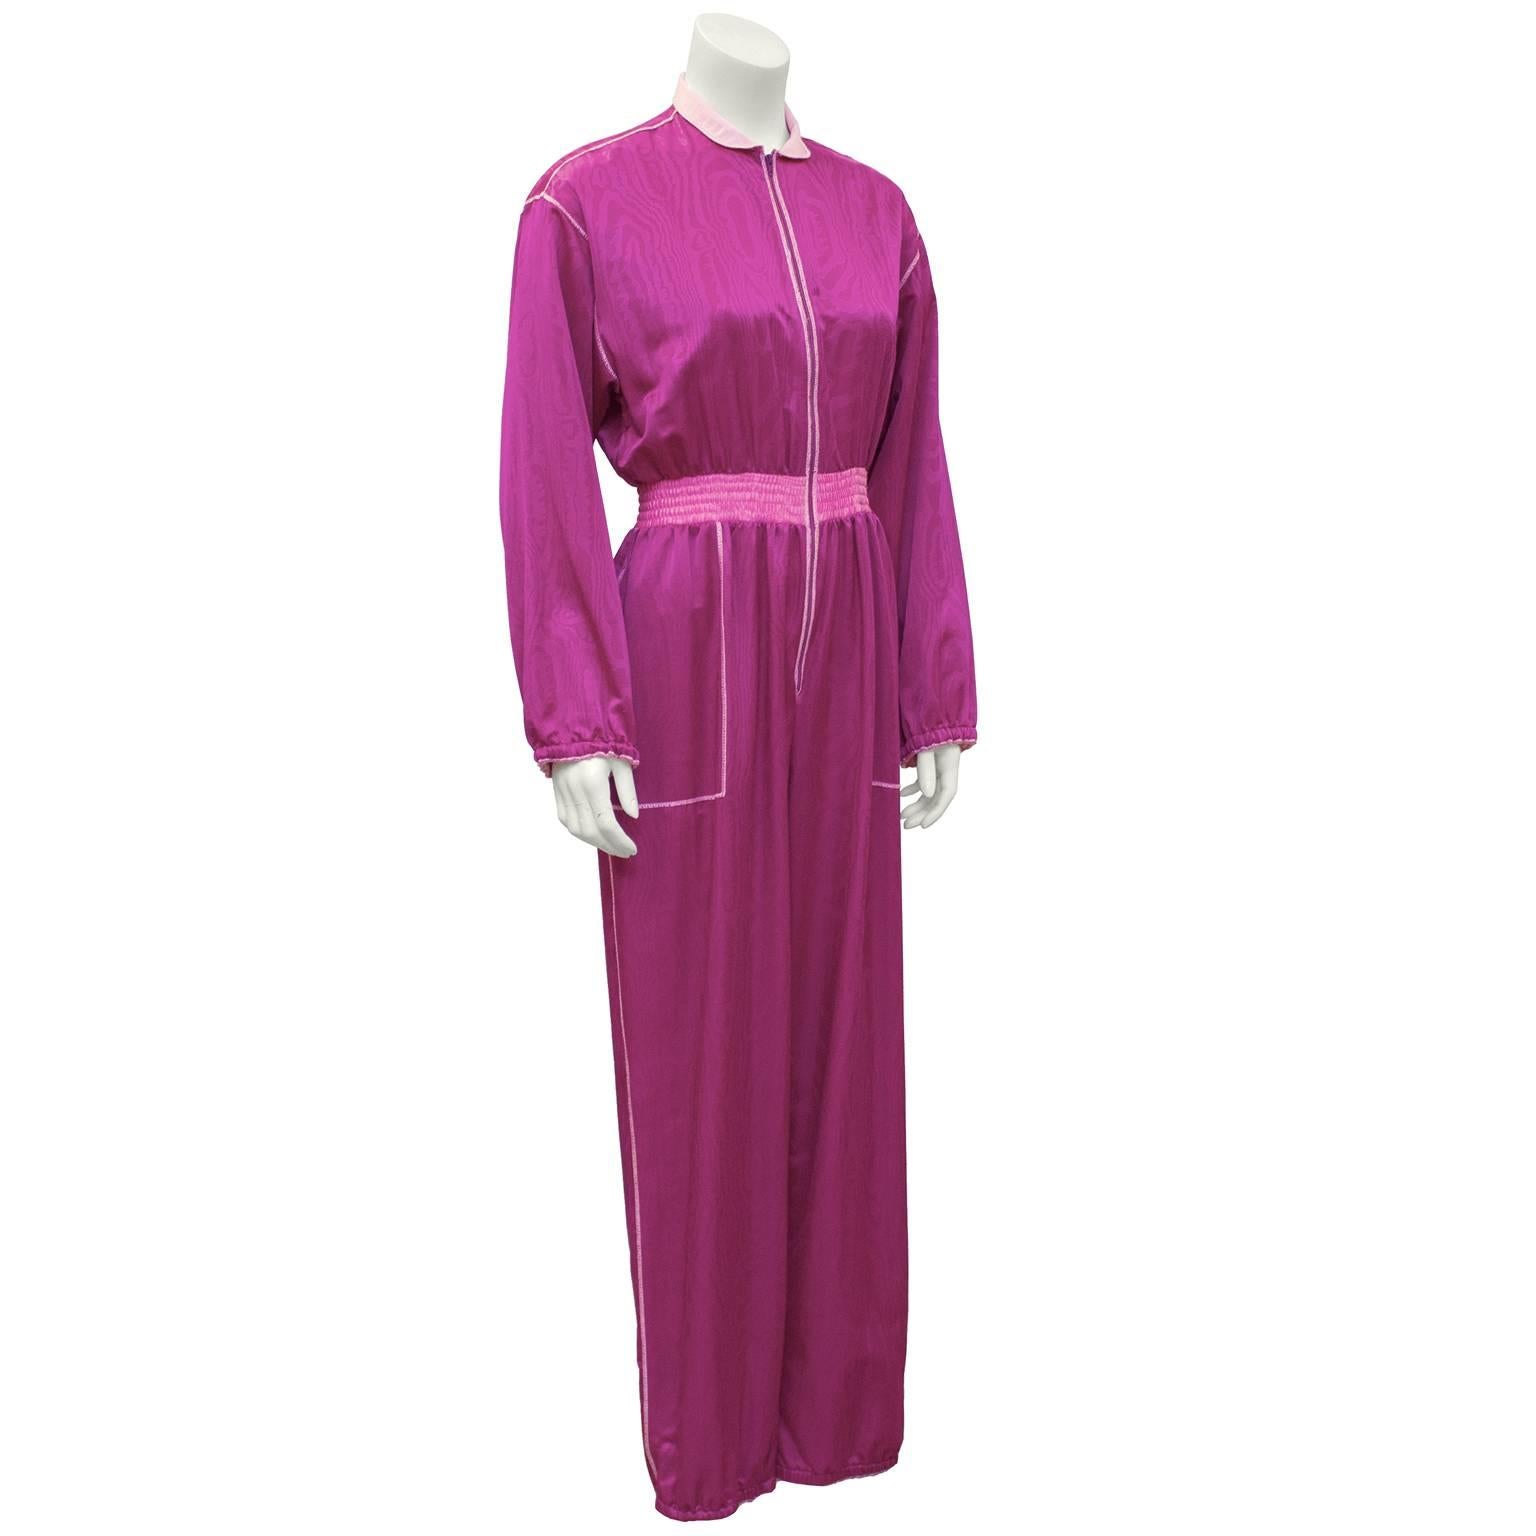 1970's Fernando Sanchez magenta and pink jumpsuit. In the 1970s Sanchez  introduced dressmaking techniques and fabrics to his lingerie designs thus began the cross over from strictly “at home wear” to being acceptable in public places. Worn by